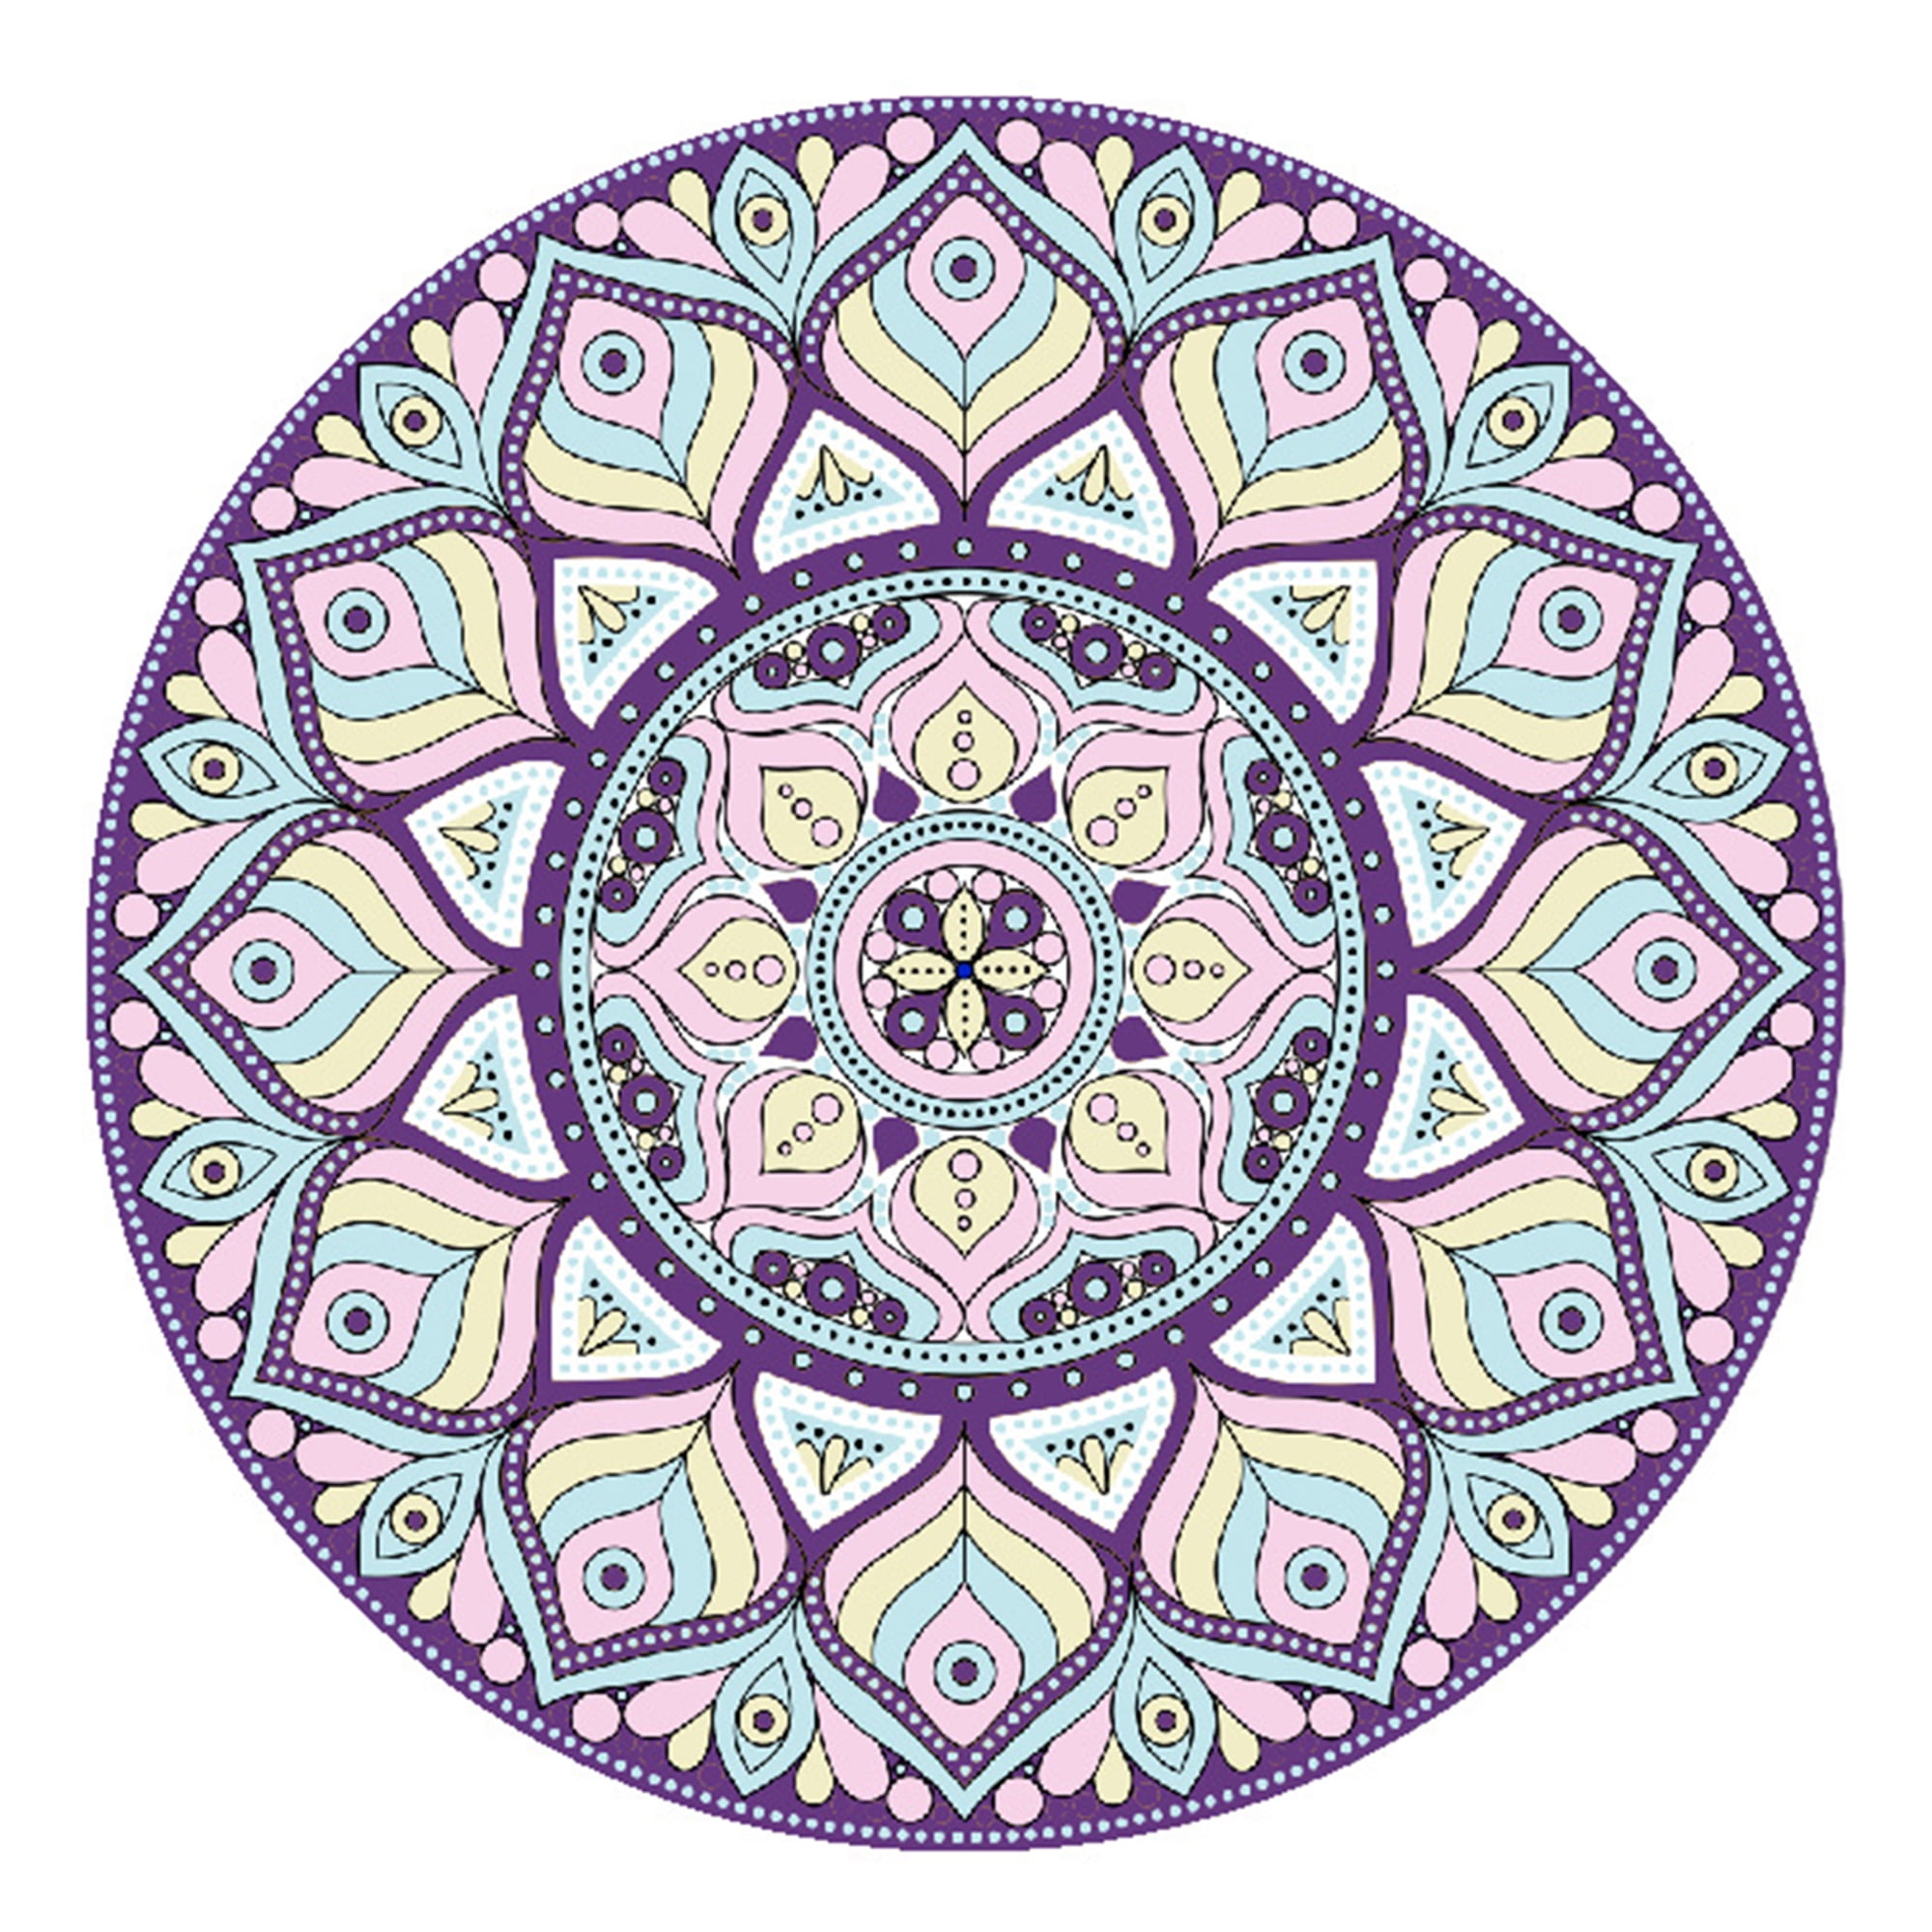 Details about   Bohemian Mandala Round Beach Tapestry Hippie Throw Yoga Mat Towel Indian Roundie 